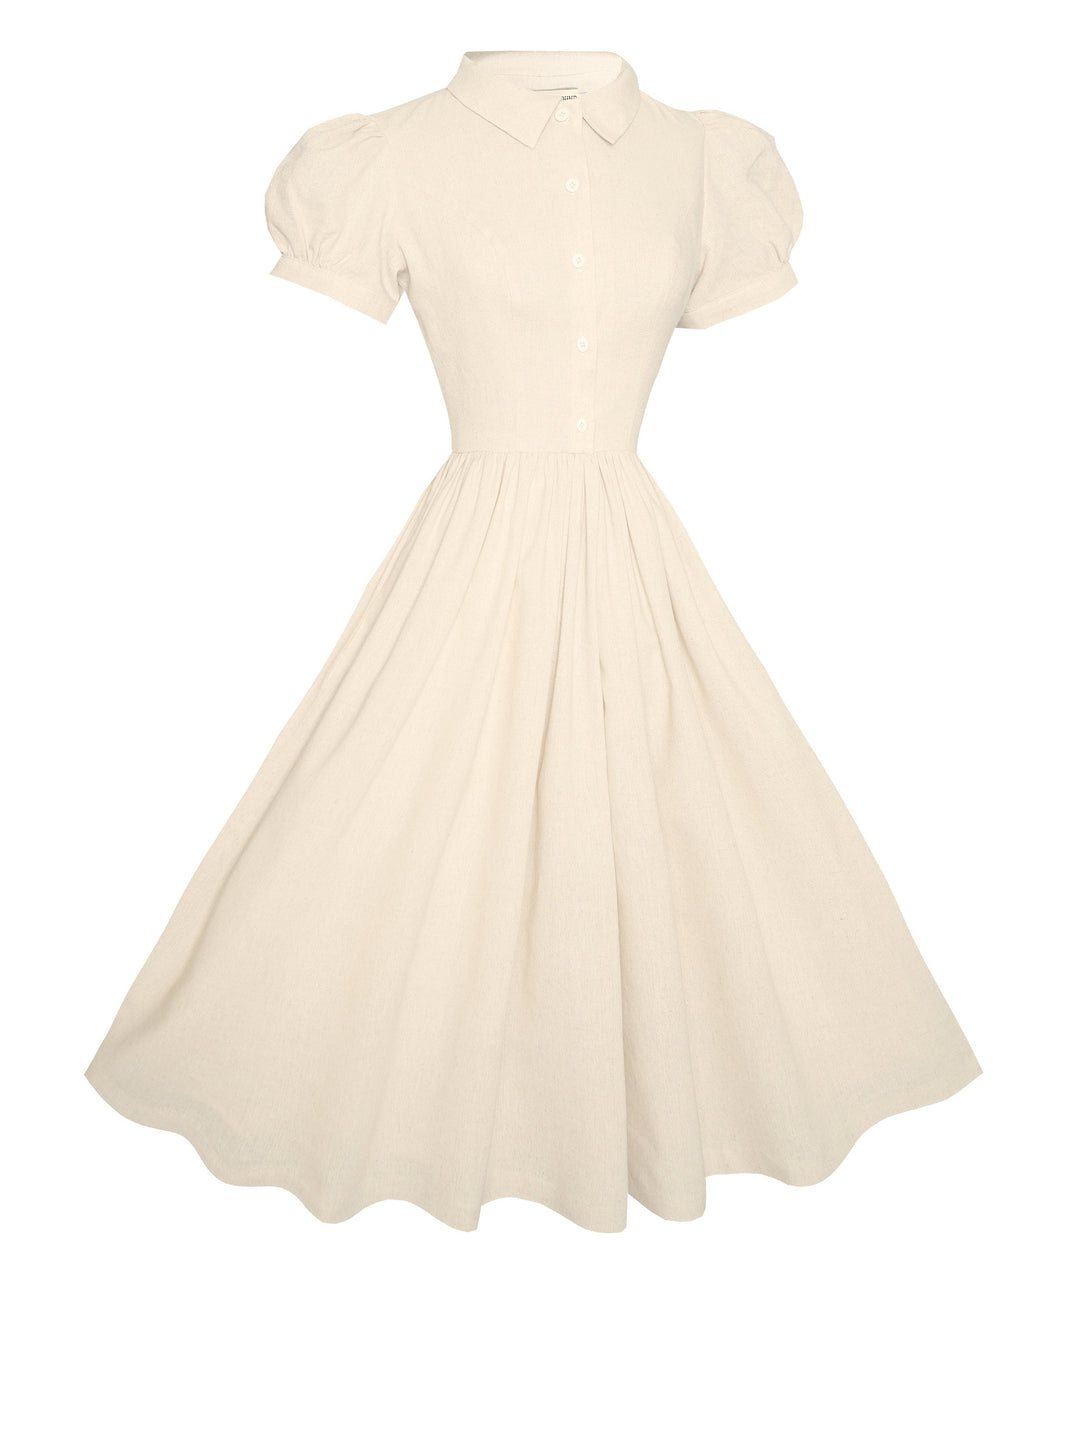 MTO - Judy Dress in Parchment Ivory Linen